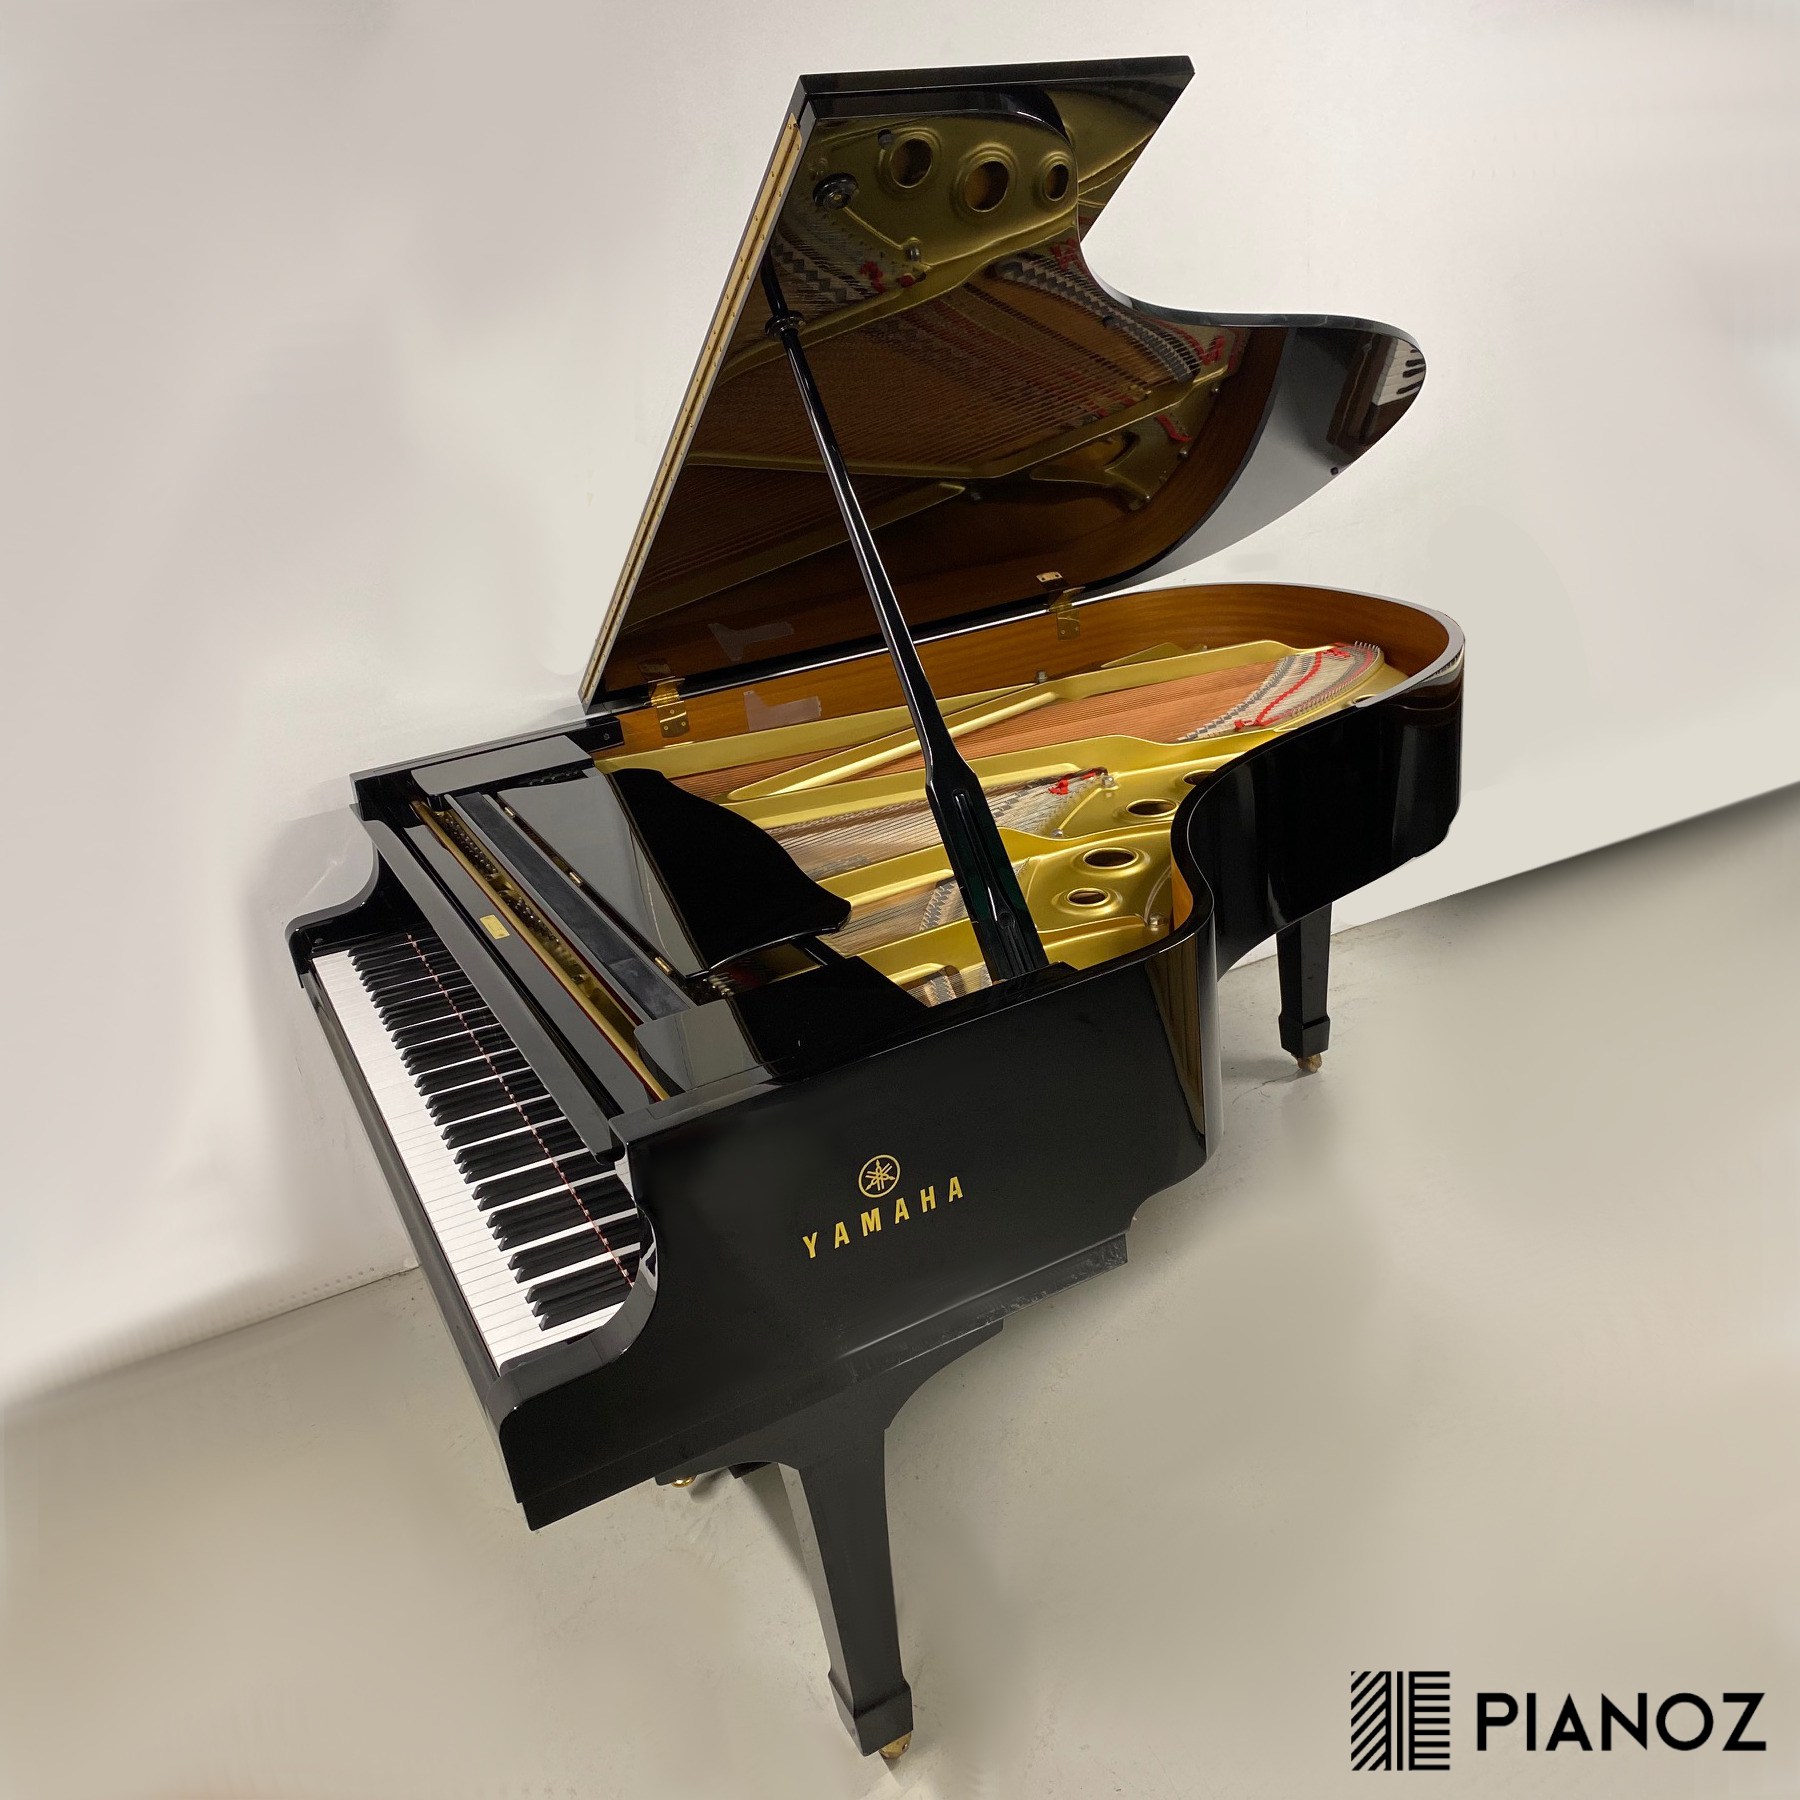 Yamaha G5 / C5 Grand Piano piano for sale in UK